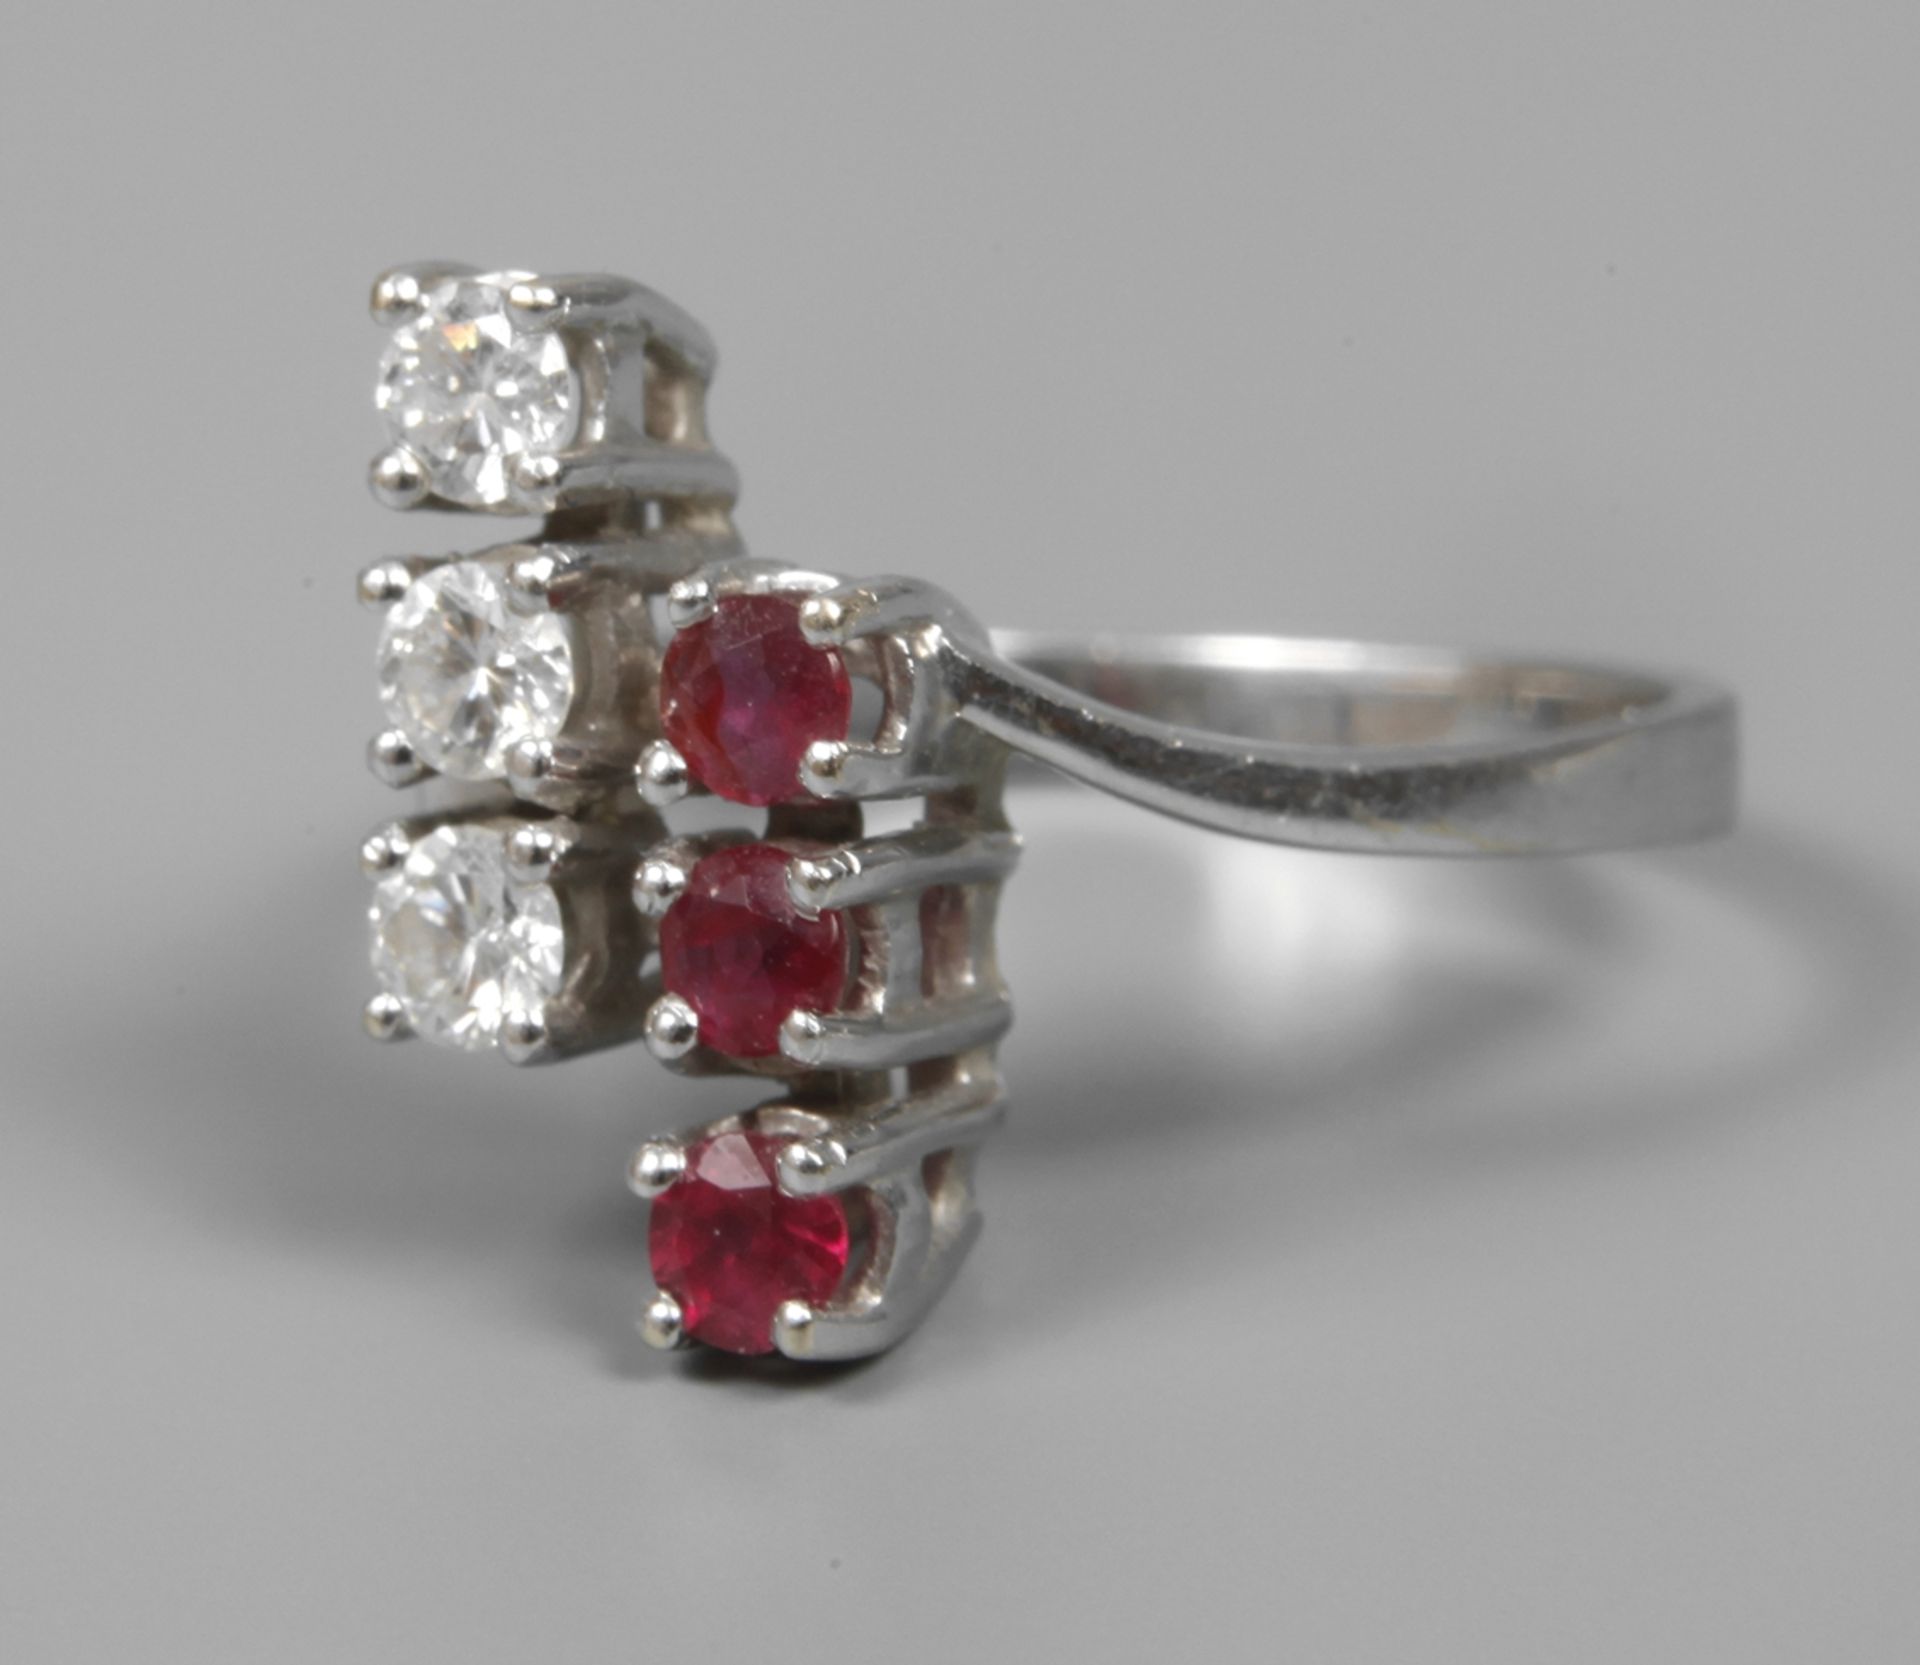 Ladies' ring with diamonds and rubies